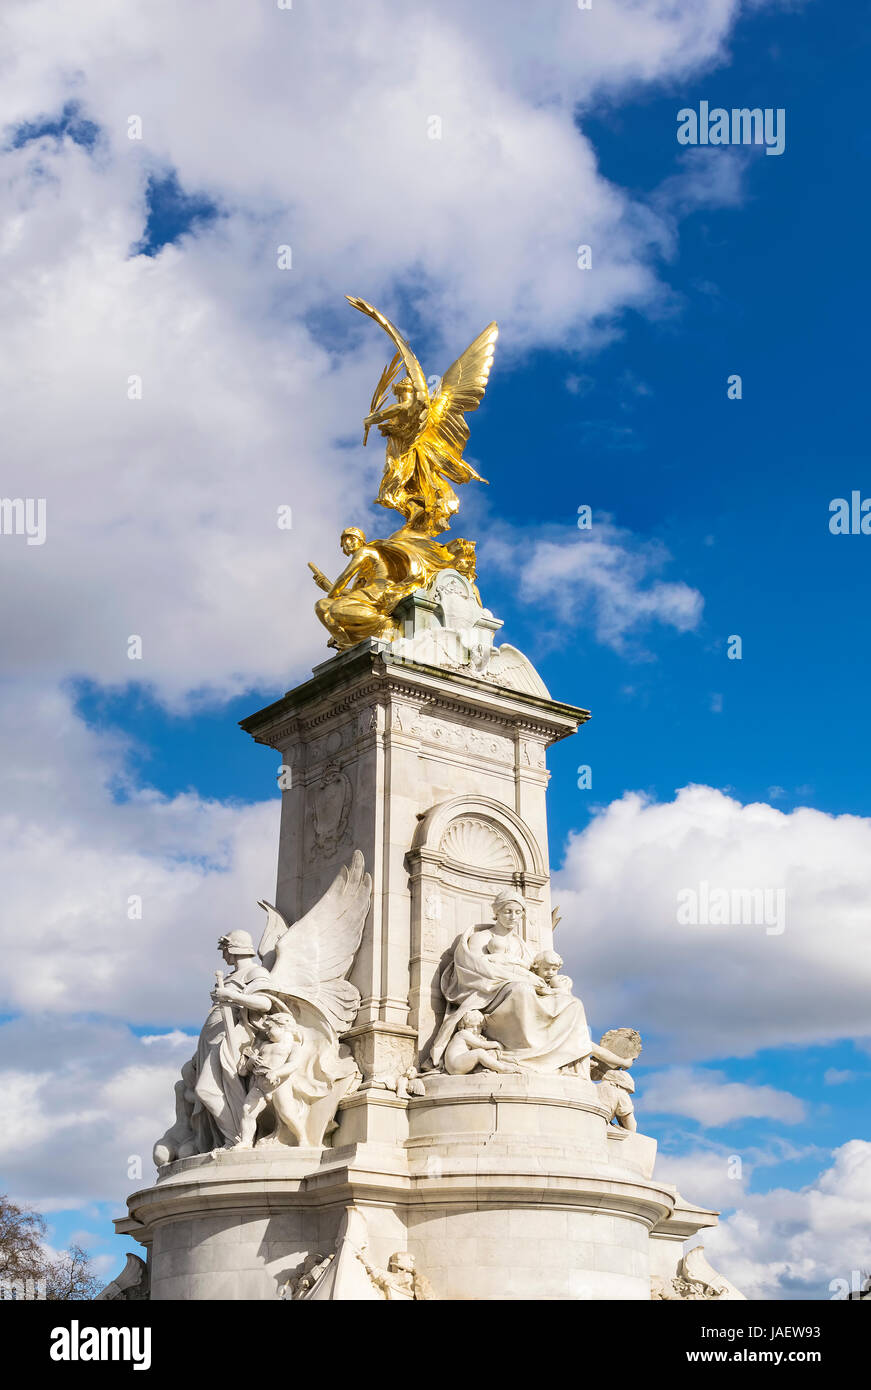 The Statue of Queen Victoria Memorial is a monument located in front of the Buckingham Palace in London. The central pylon of the memorial is of Pente Stock Photo